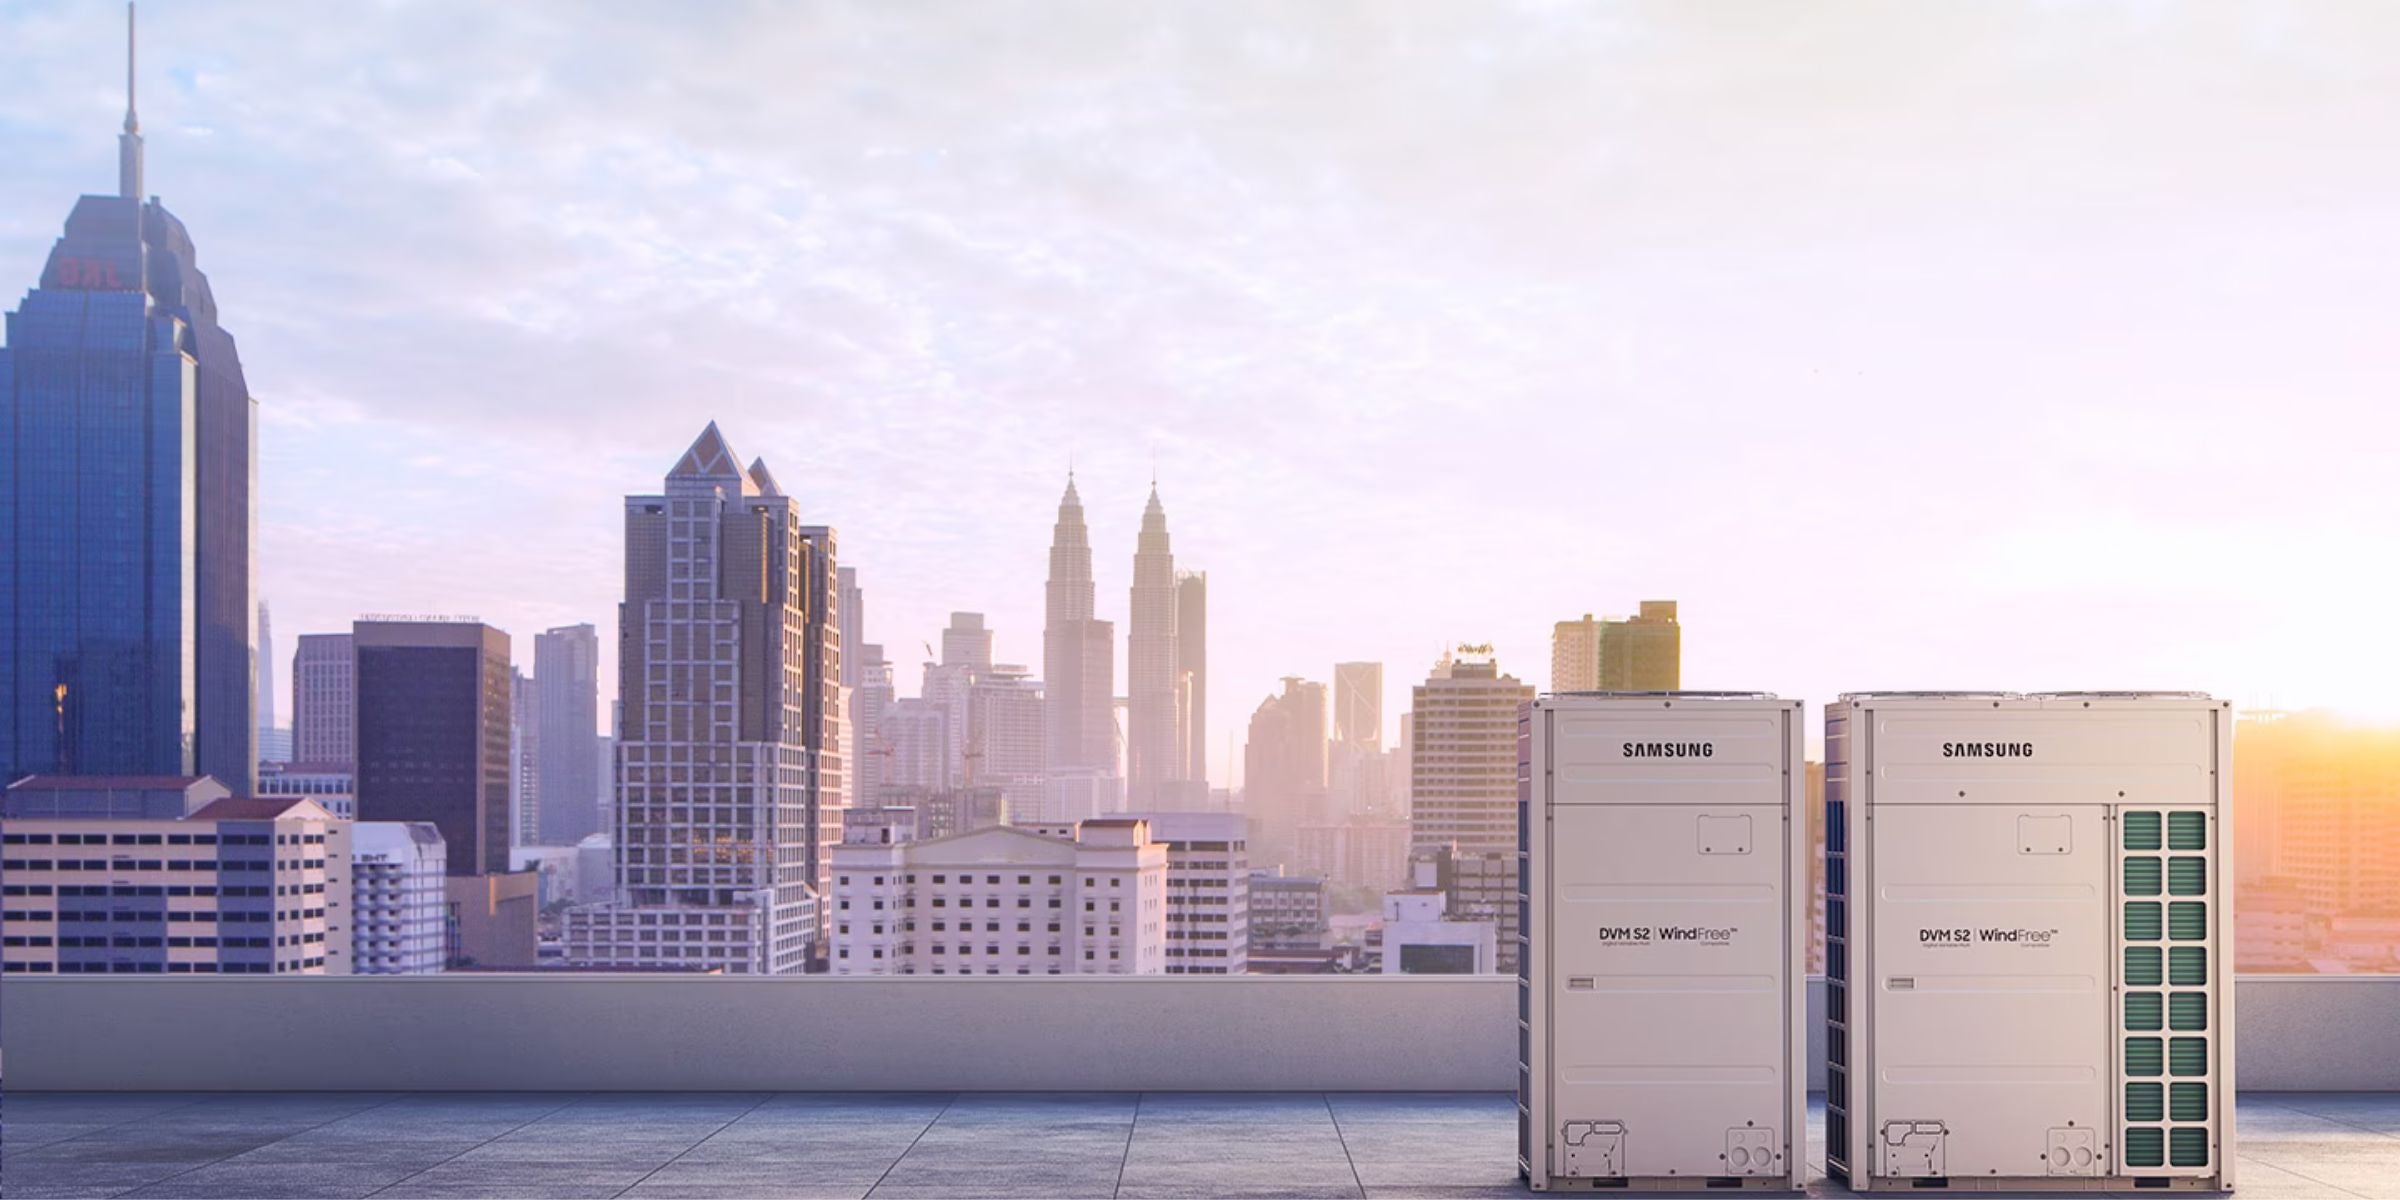 Samsung WindFree AI Enabled DVM S2 Outdoor Unit on Skyscraper Building Roof